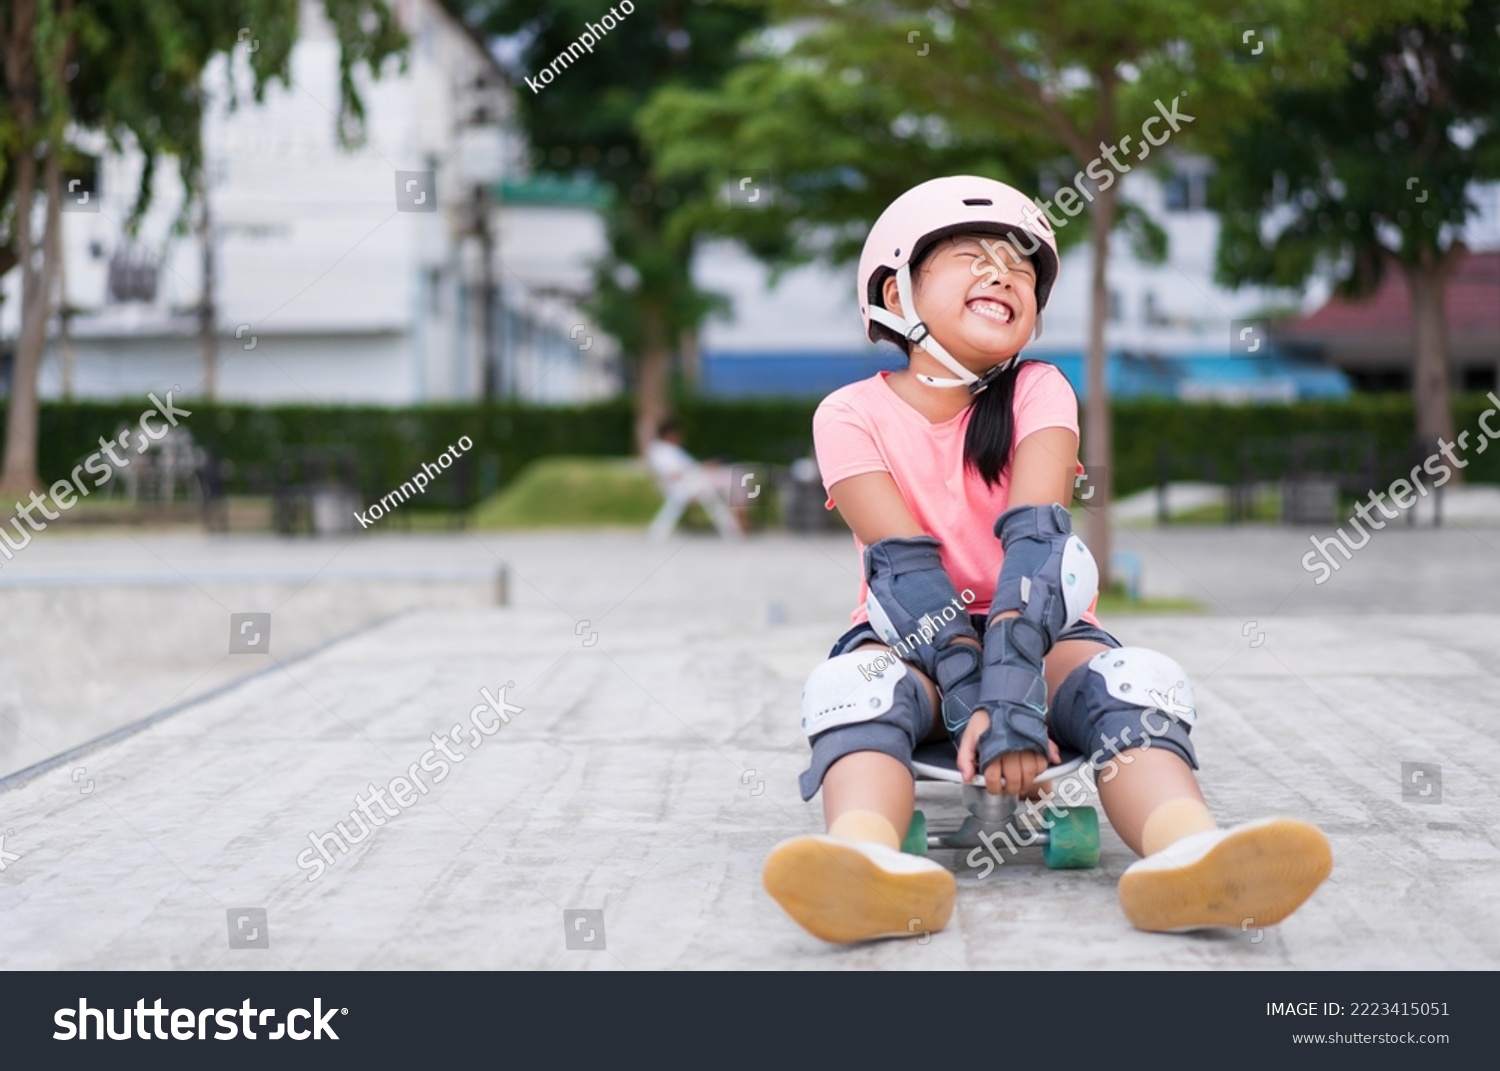 asian child skater or kid girl smile playing skateboard or sitting laugh on surf skate and enjoy fun in skate park for extreme sports exercise to wear helmet elbow wrist knee support for body safety #2223415051